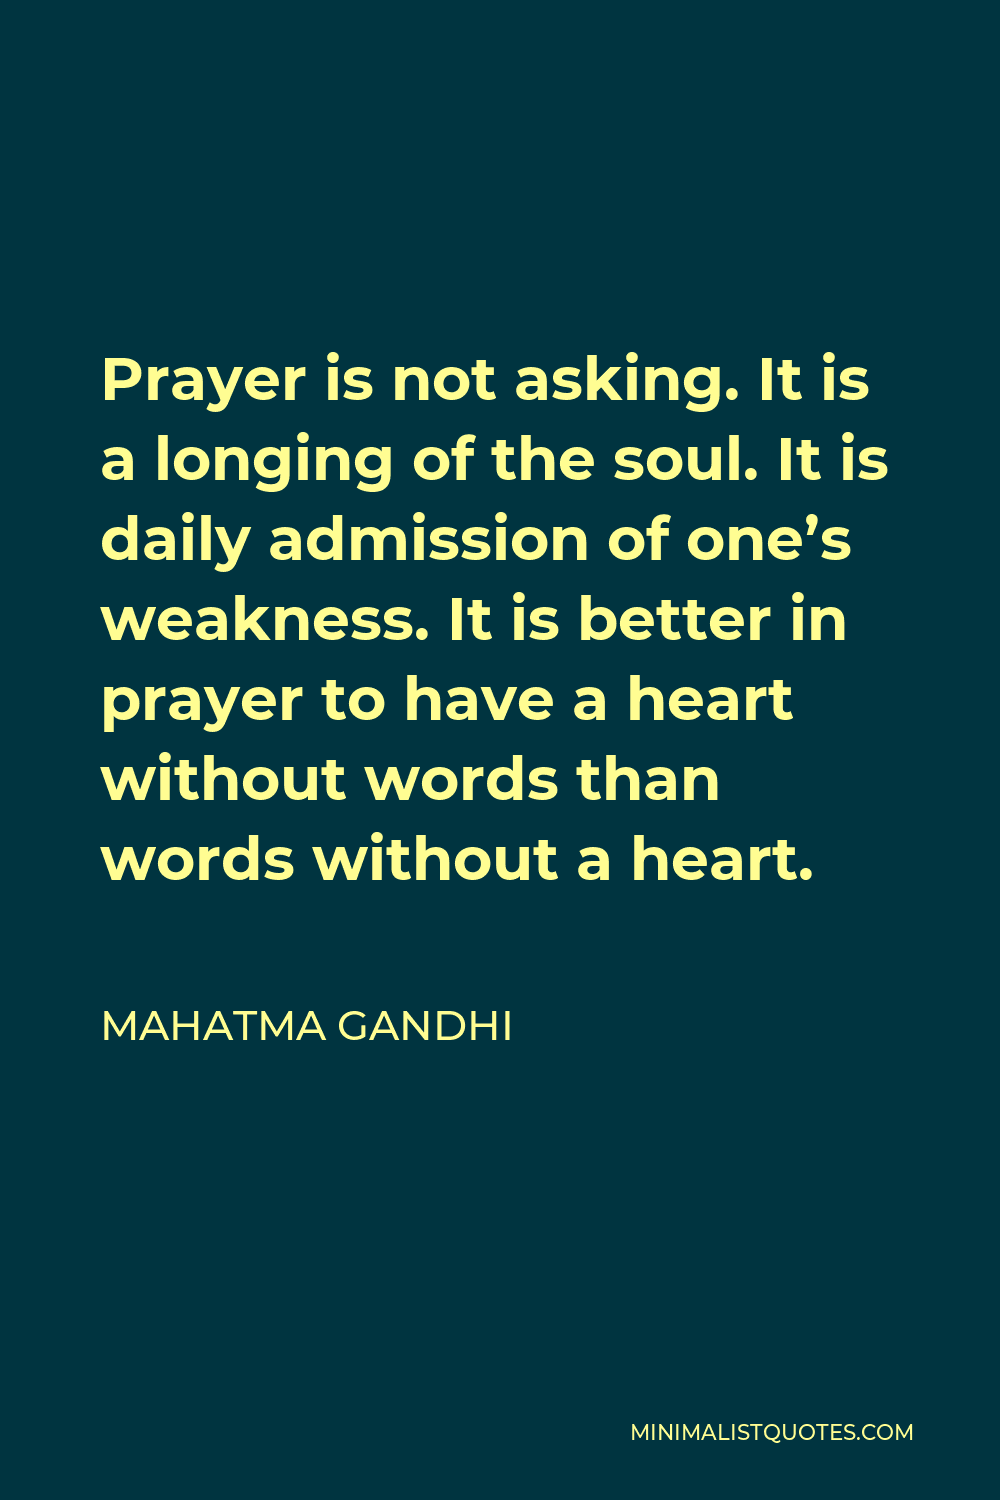 Mahatma Gandhi Quote - Prayer is not asking. It is a longing of the soul. It is daily admission of one’s weakness. It is better in prayer to have a heart without words than words without a heart.